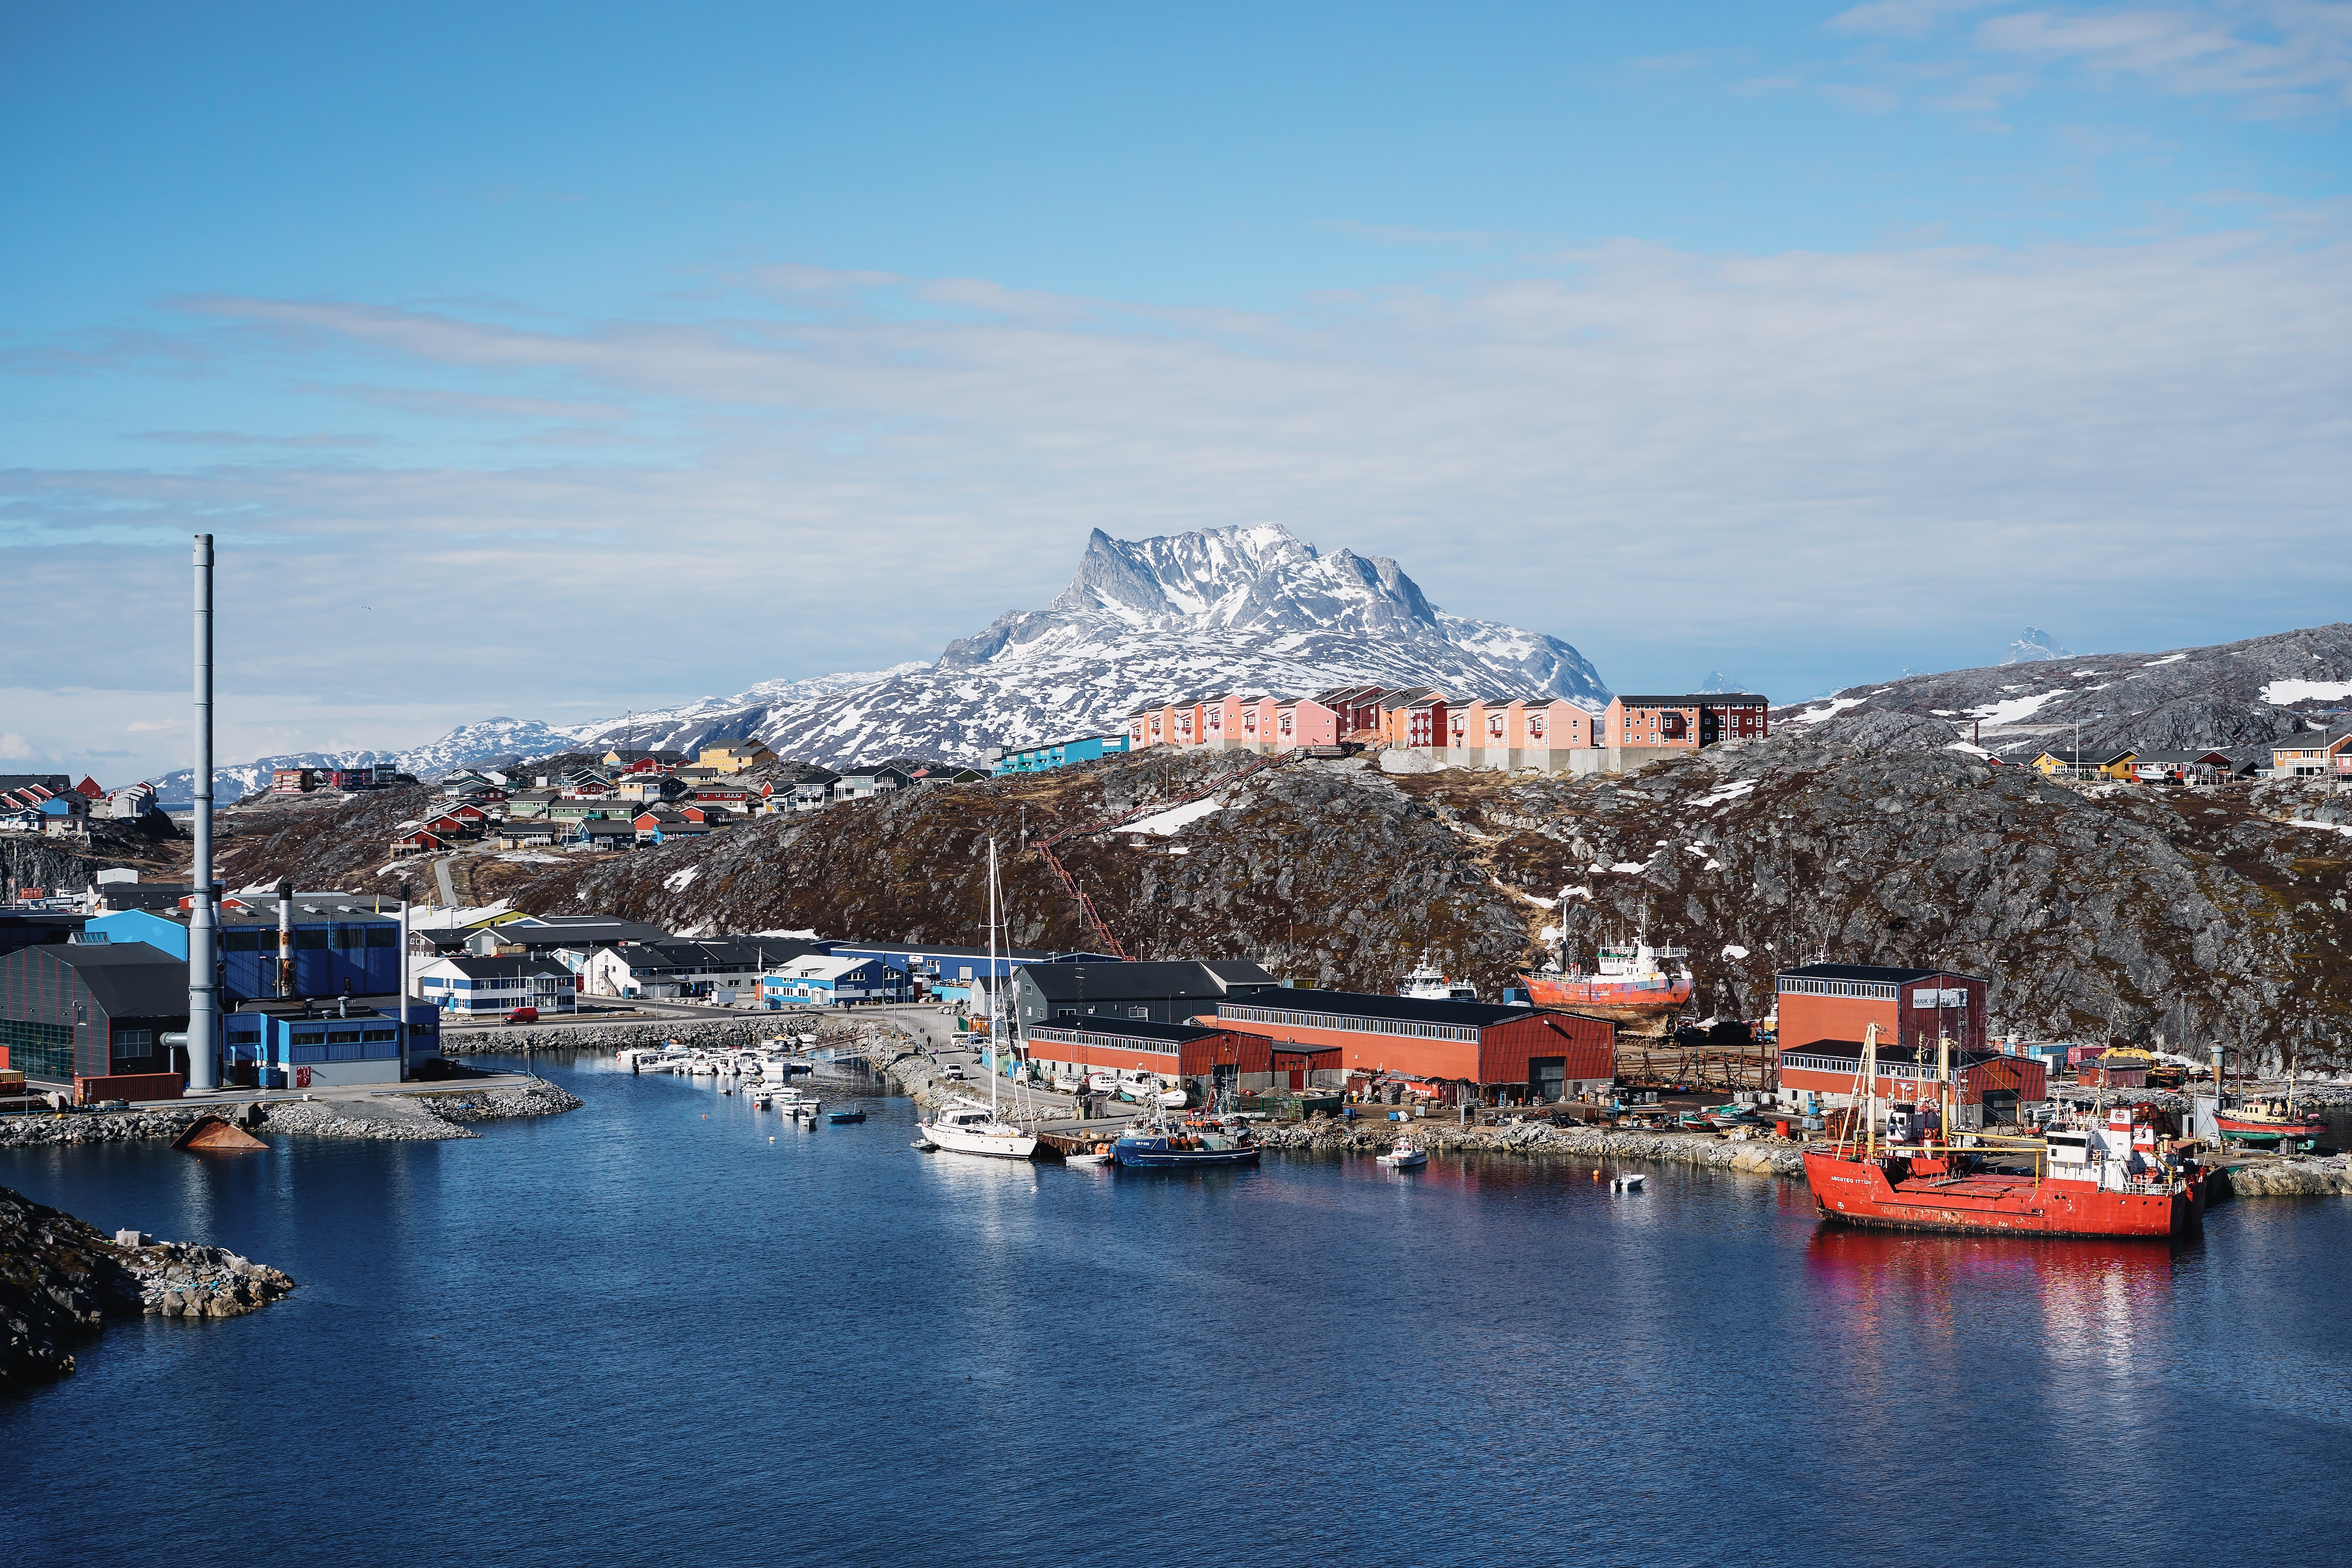 boats in the harbor of a small arctic town